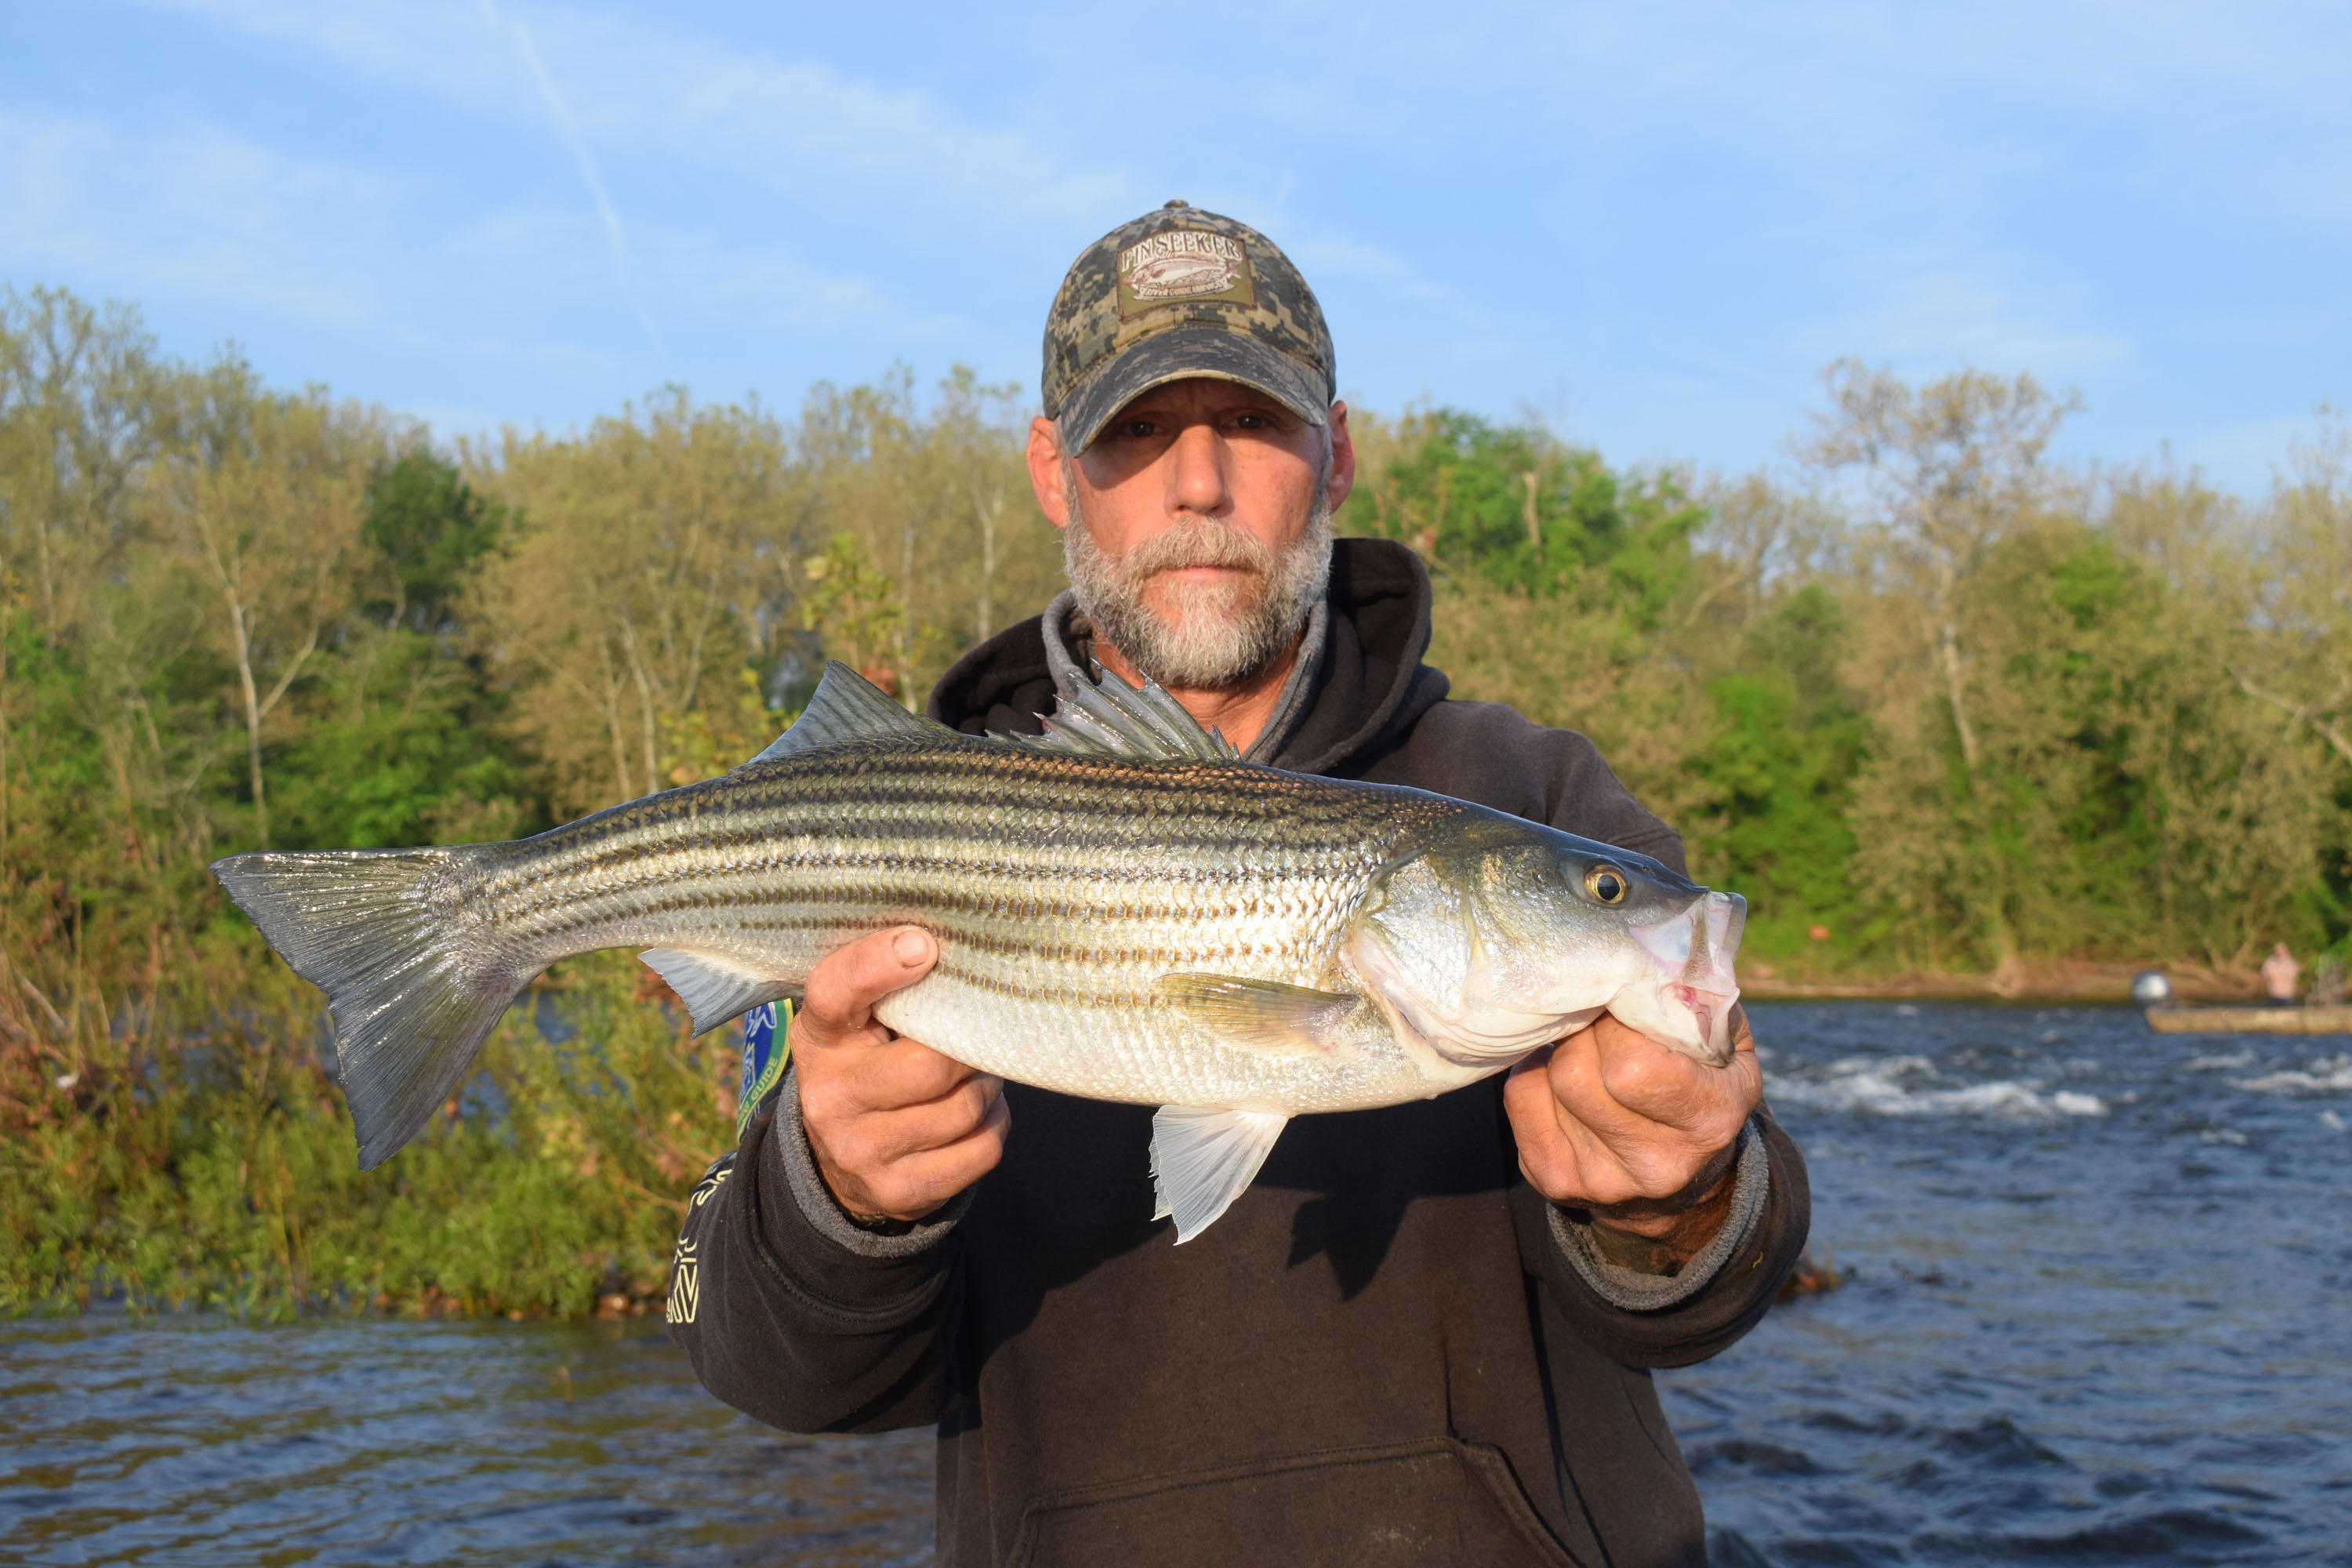 Delaware River fishing guide leads 1 of the best days I've ever